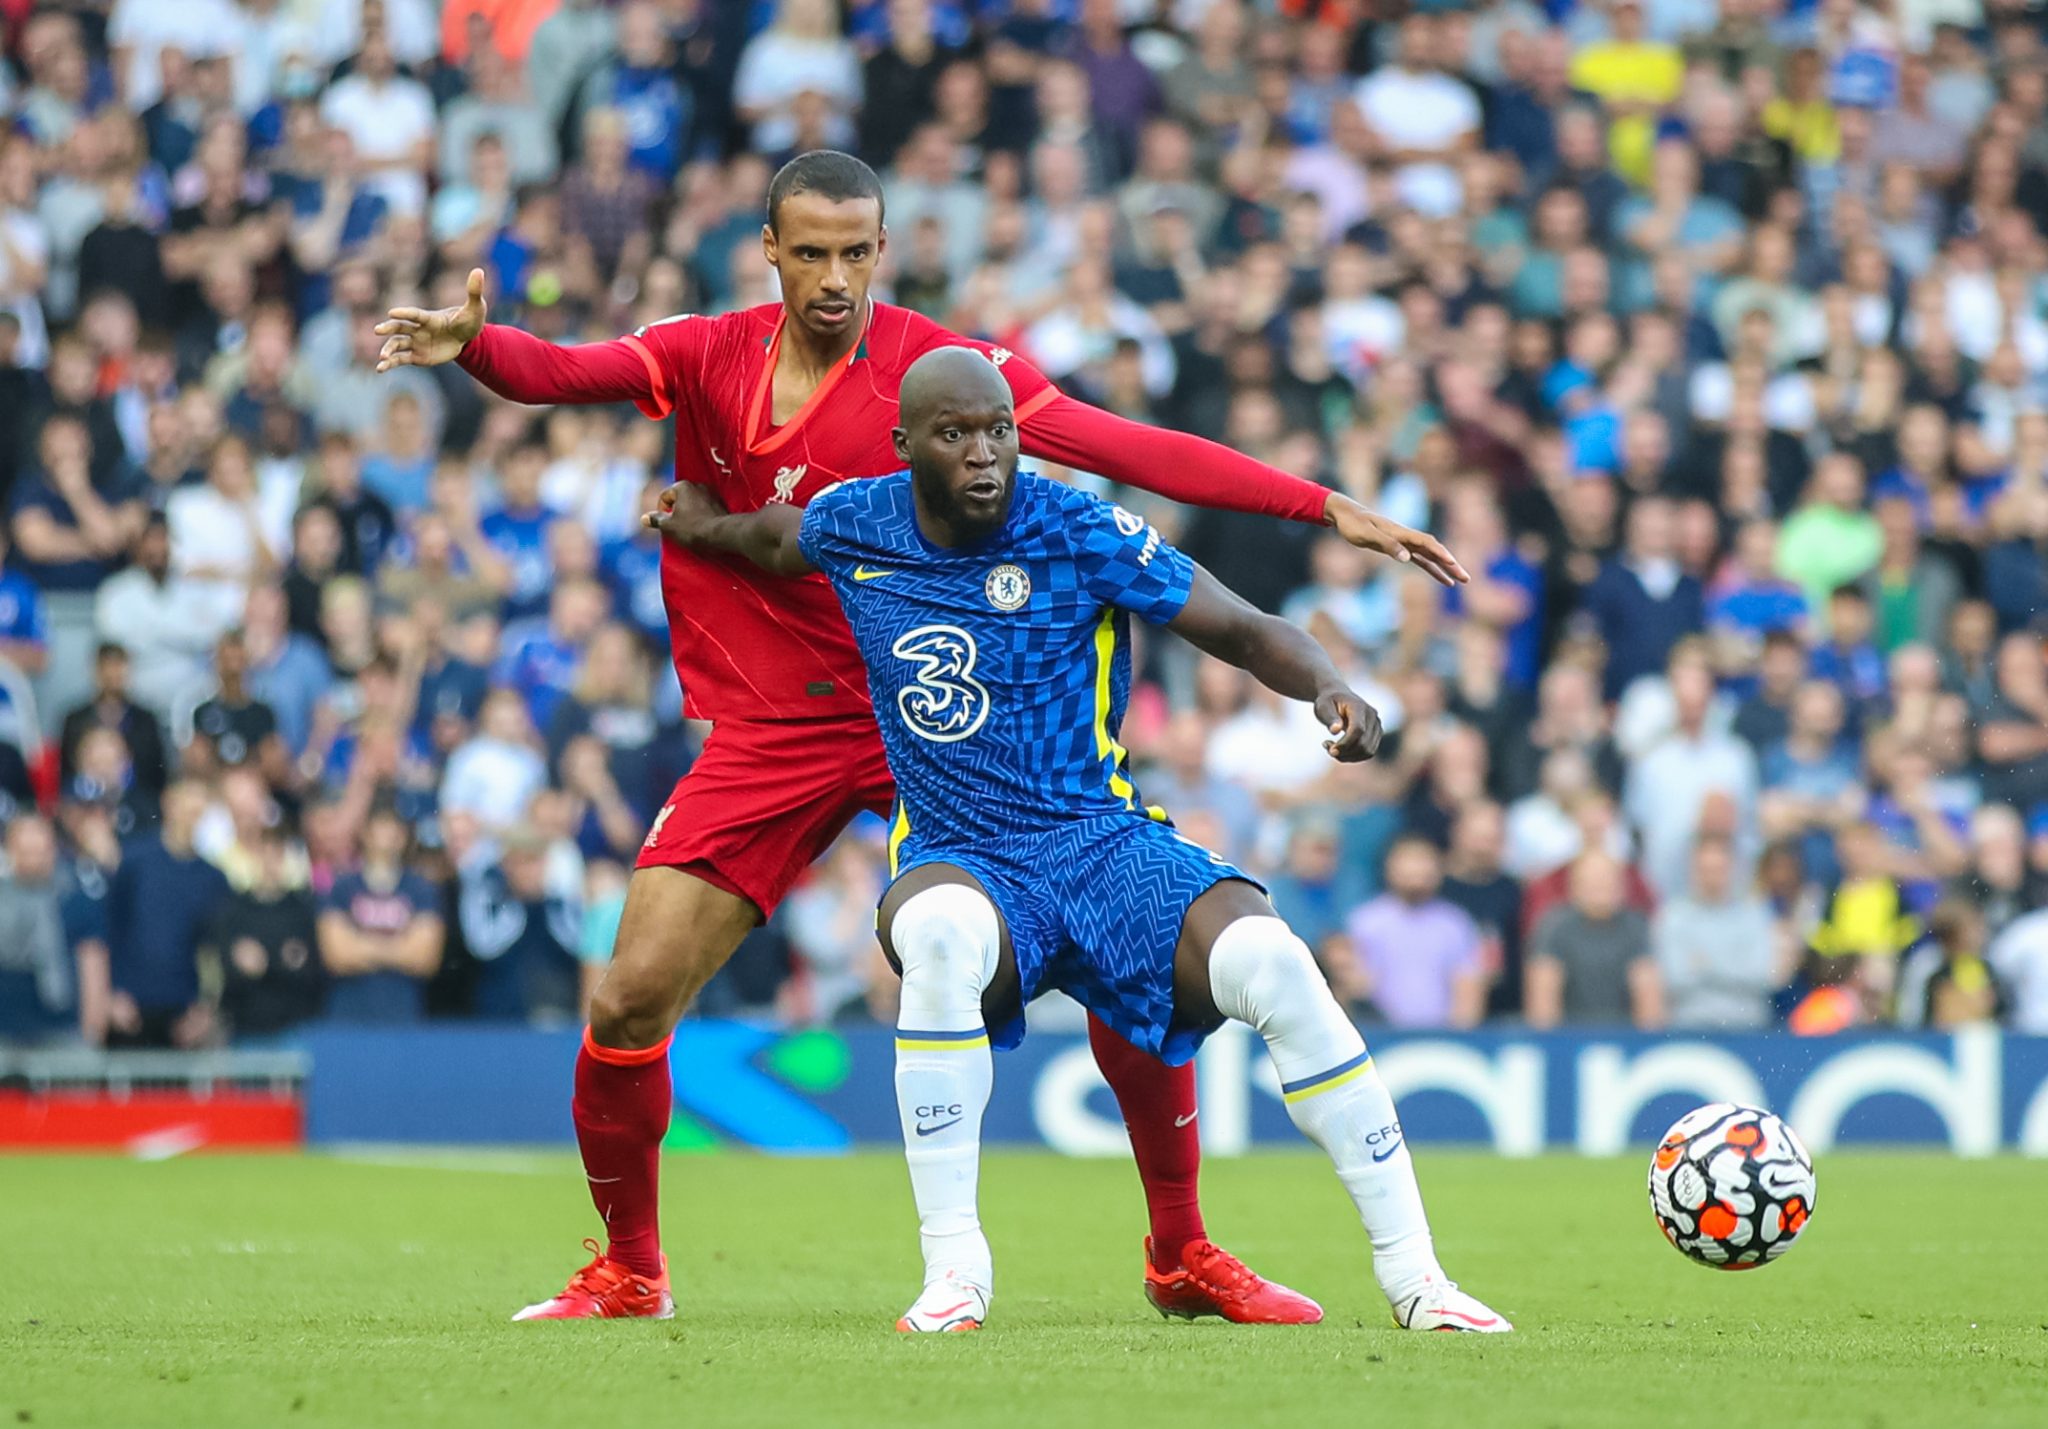 Lukaku and Matip square off during Liverpool vs Chelsea